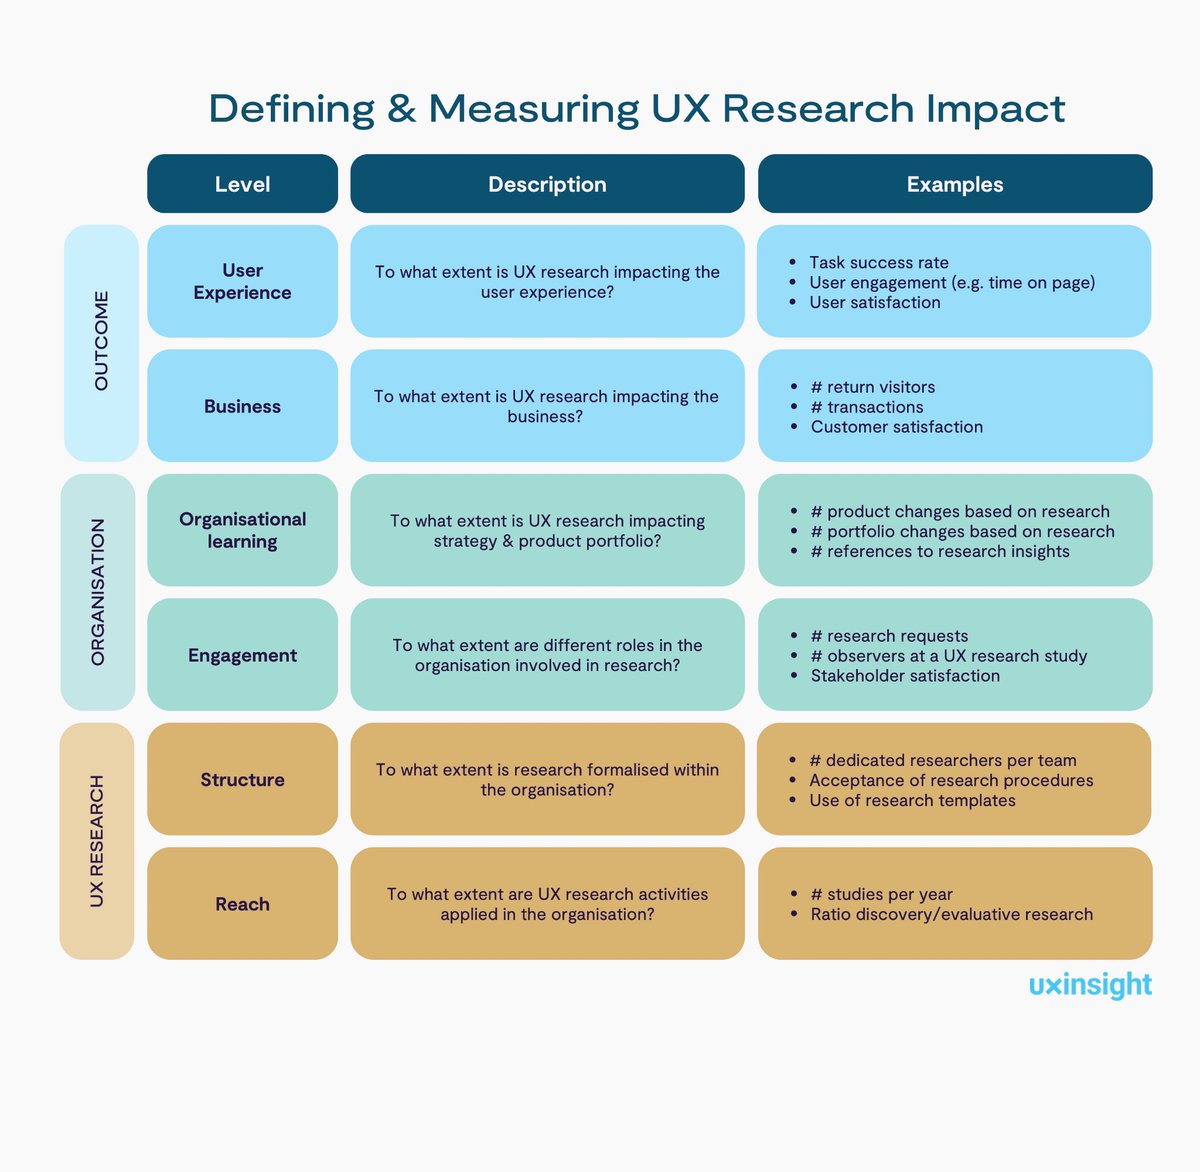 How to measure UX research impact

Very detailed framework for defining and measuring  research impact across different levels (business outcomes, customer engagement, reach, etc)

uxinsight.org/how-to-measure…